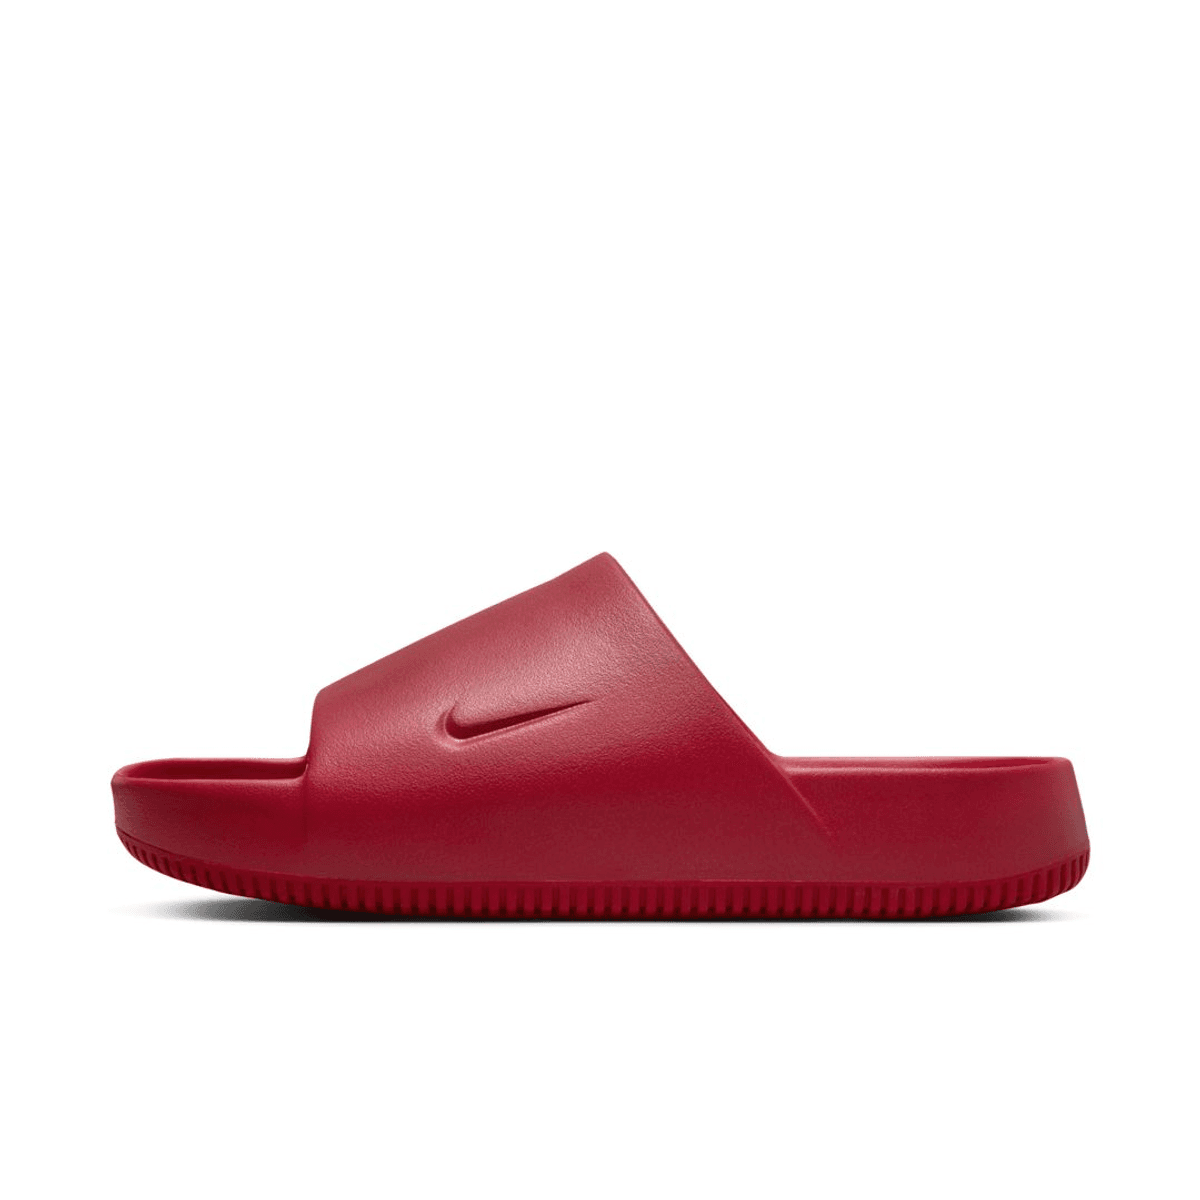 The Nike Calm Slide Arrives In Red